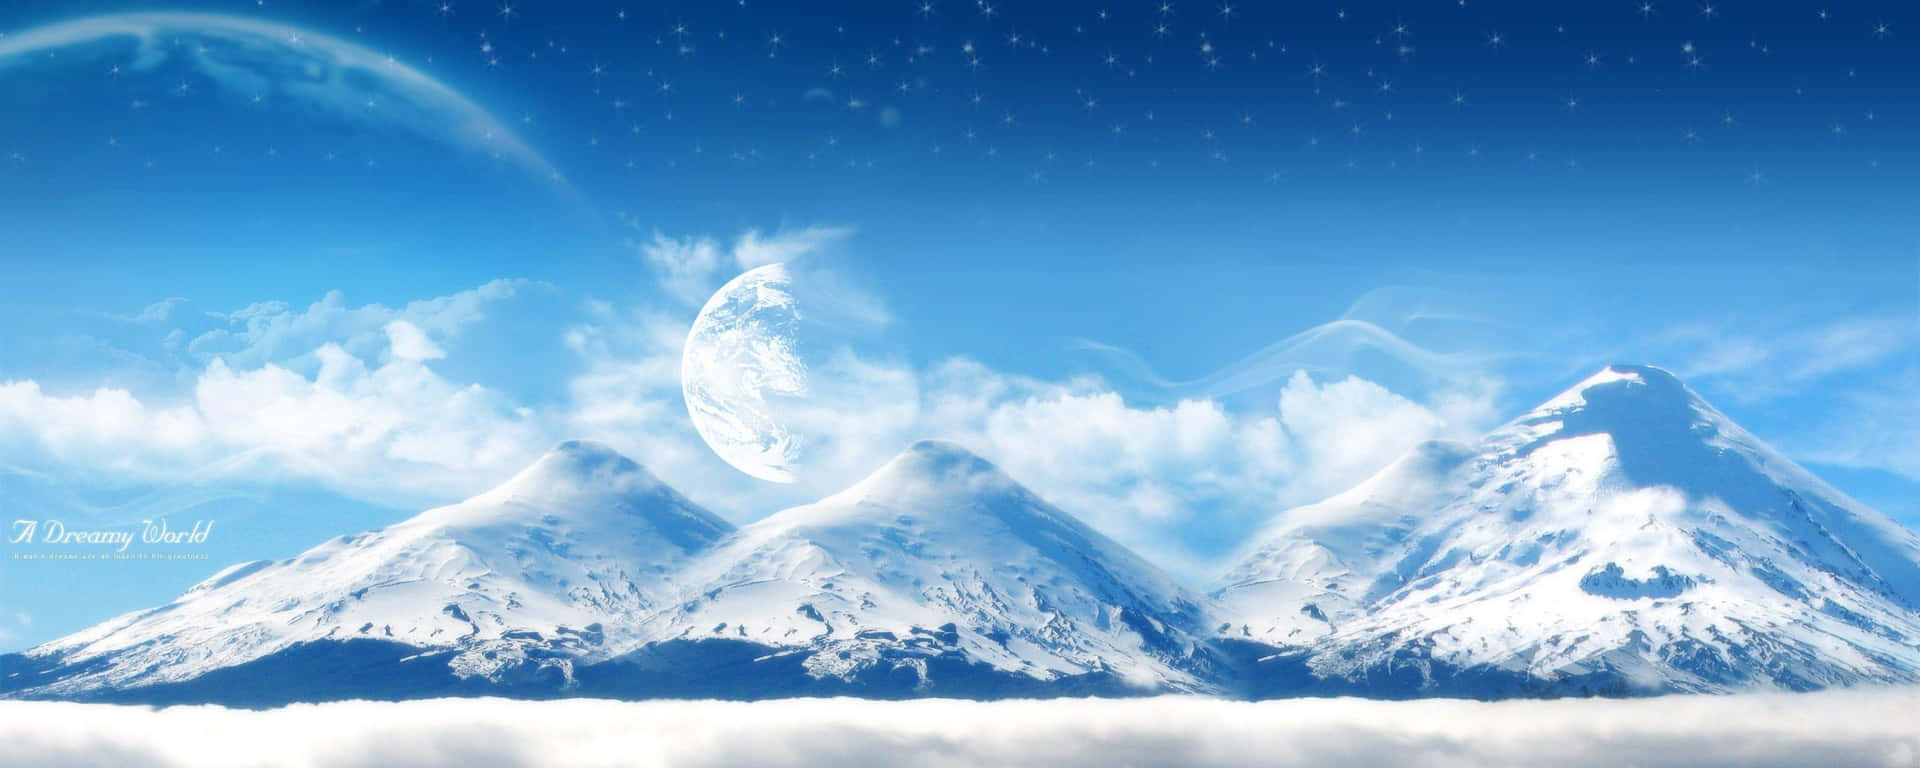 Enjoy the majestic beauty of Snowy Mountains